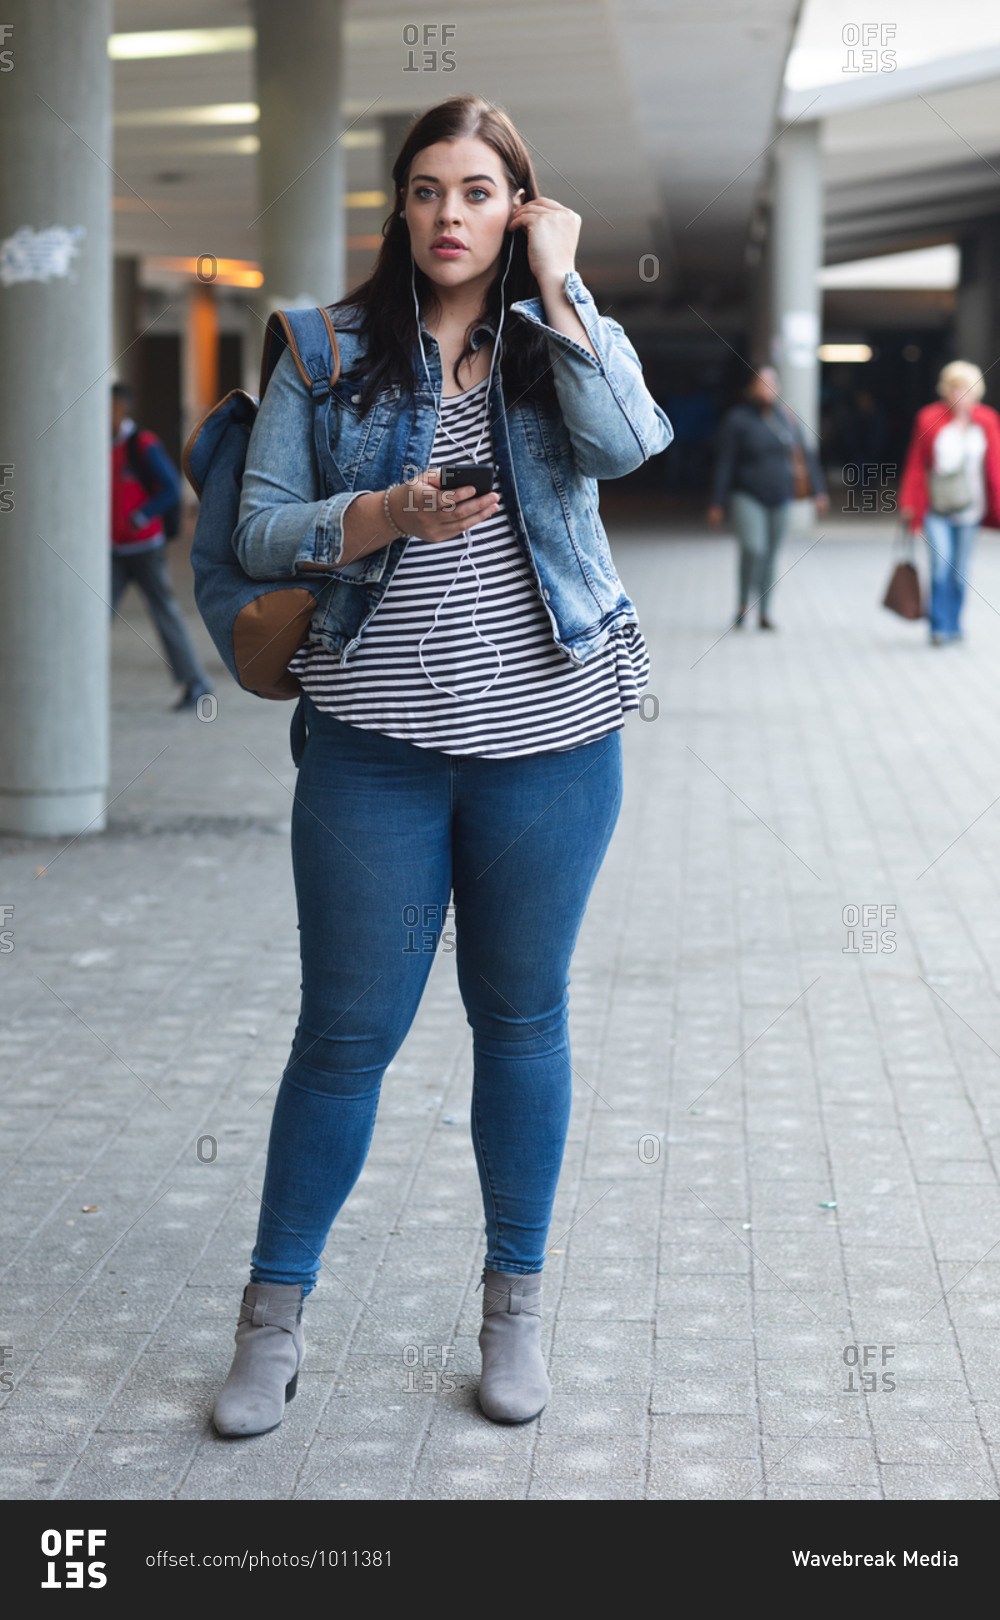 Curvy Caucasian woman out and about in the city streets during the day, smiling and using her smartphone wearing earphones, with modern building in the background